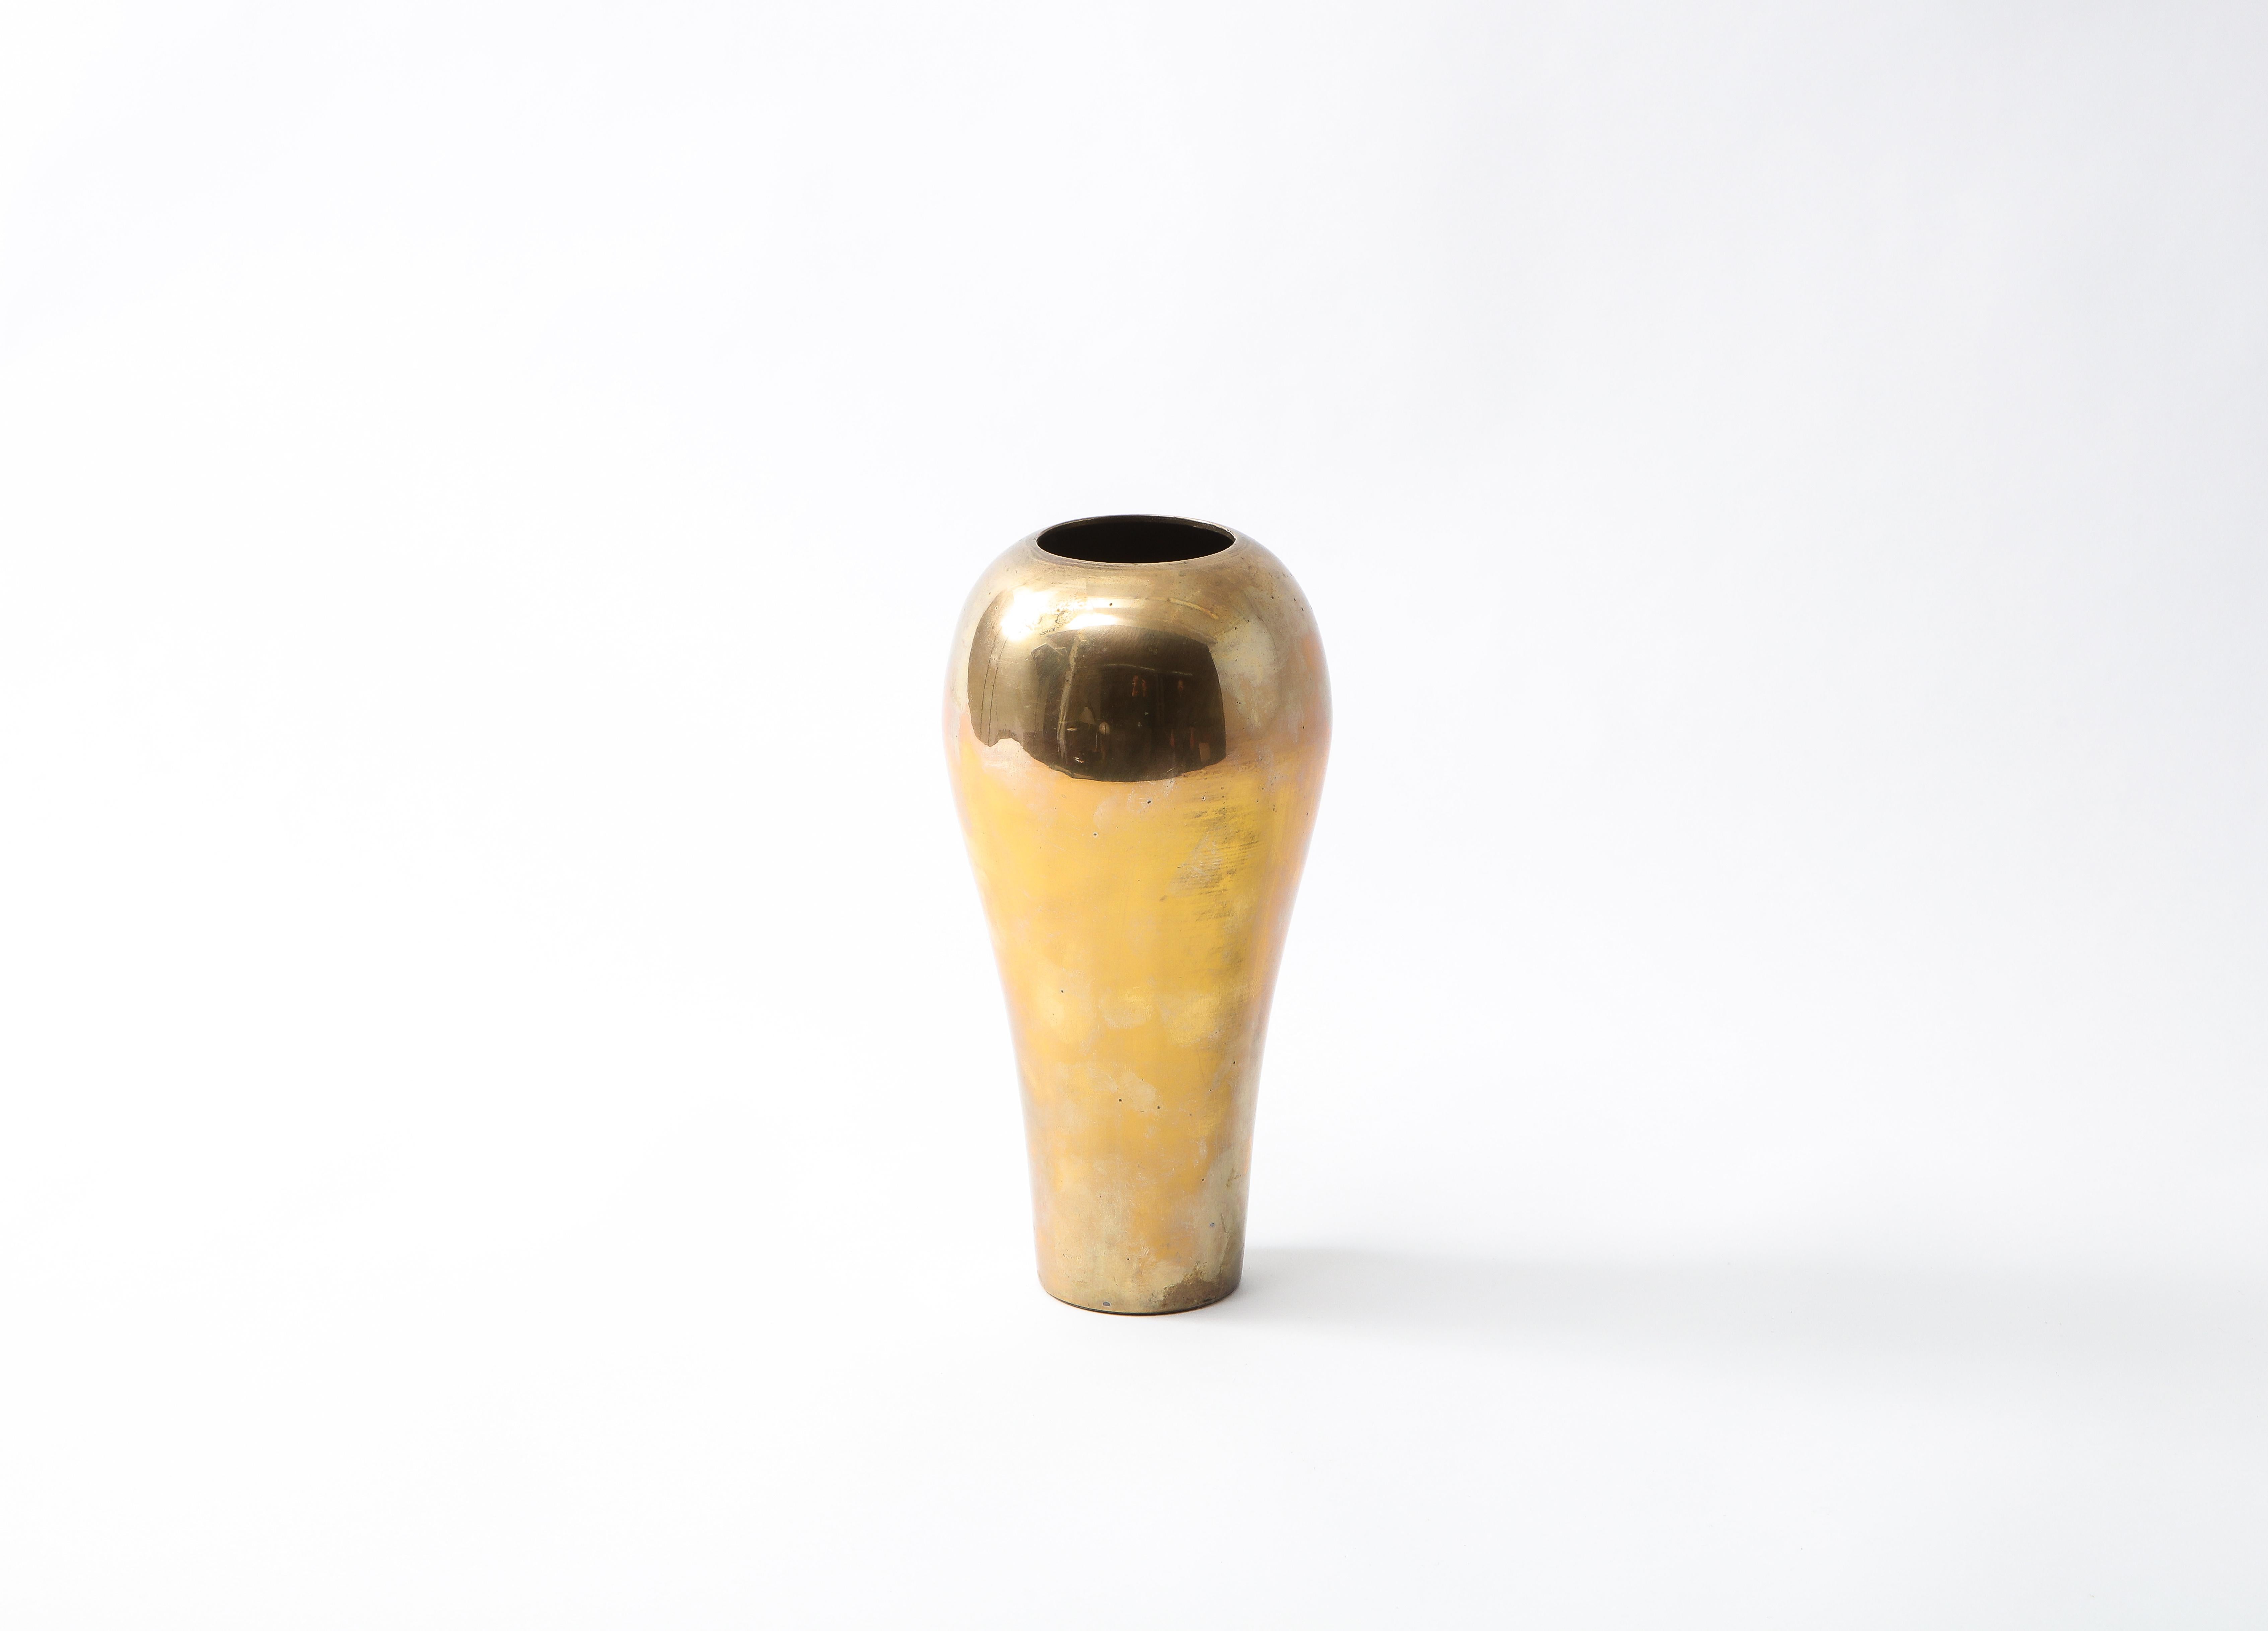 Mid-Century French polished bronze vase that mushrooms out towards the top. The exterior boasts an elegant, antique patina. Reminiscent of the forms of Brancusi.